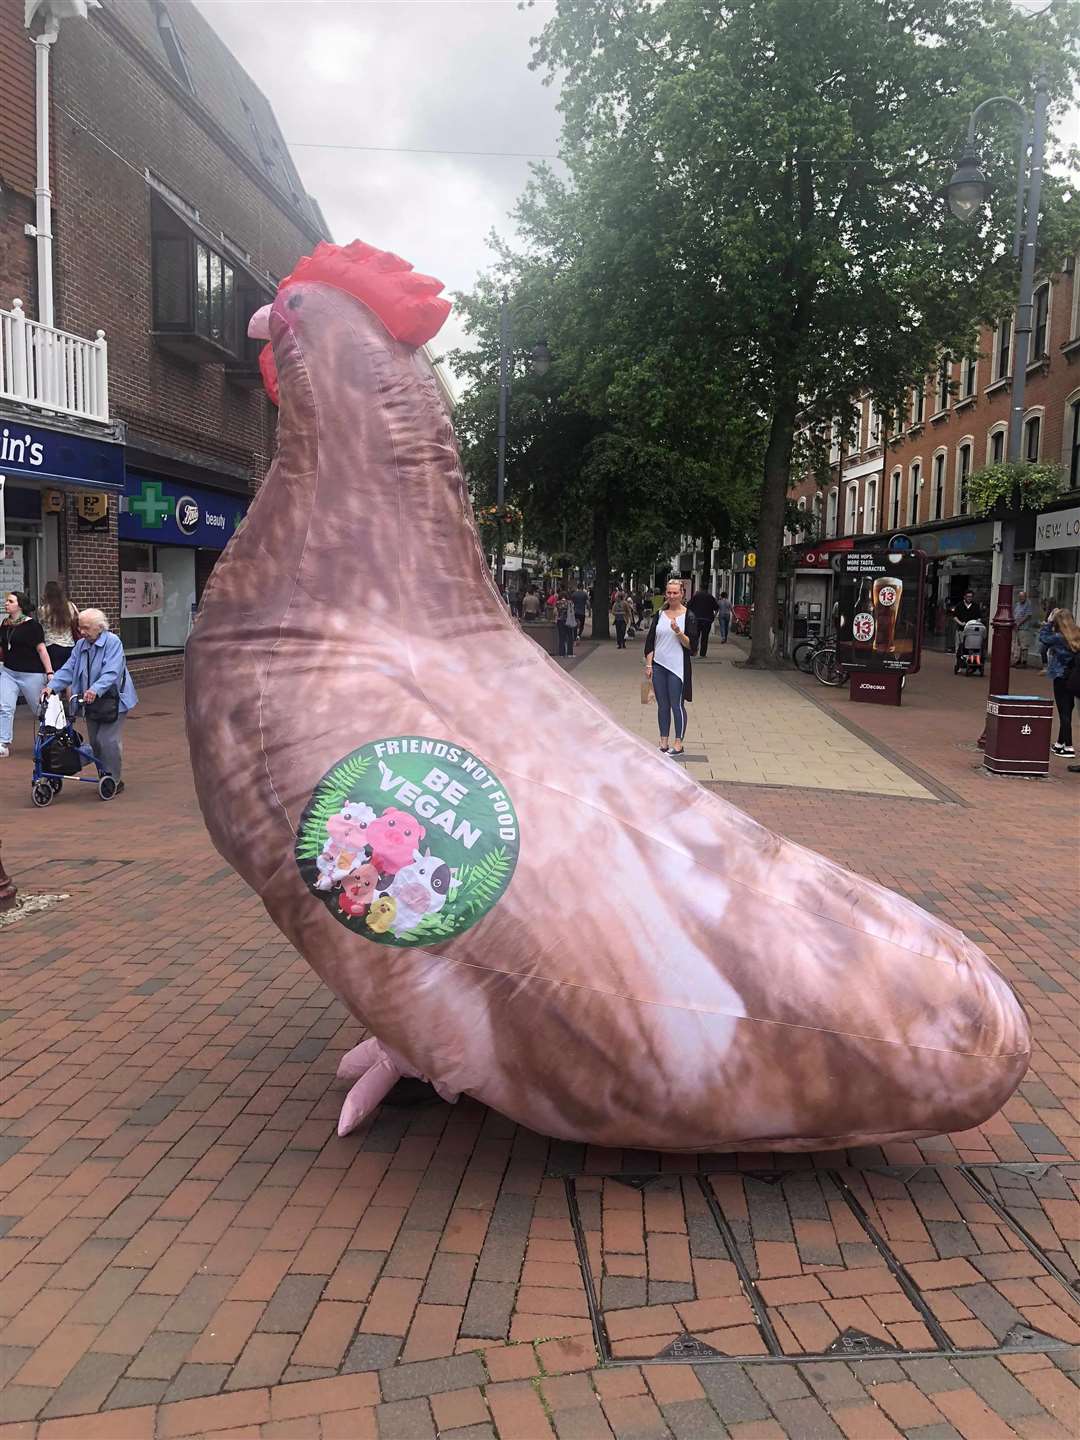 Animal Aid activists brought a huge inflatable chicken to Tunbridge Wells as part of their vegan campaign. (2332177)